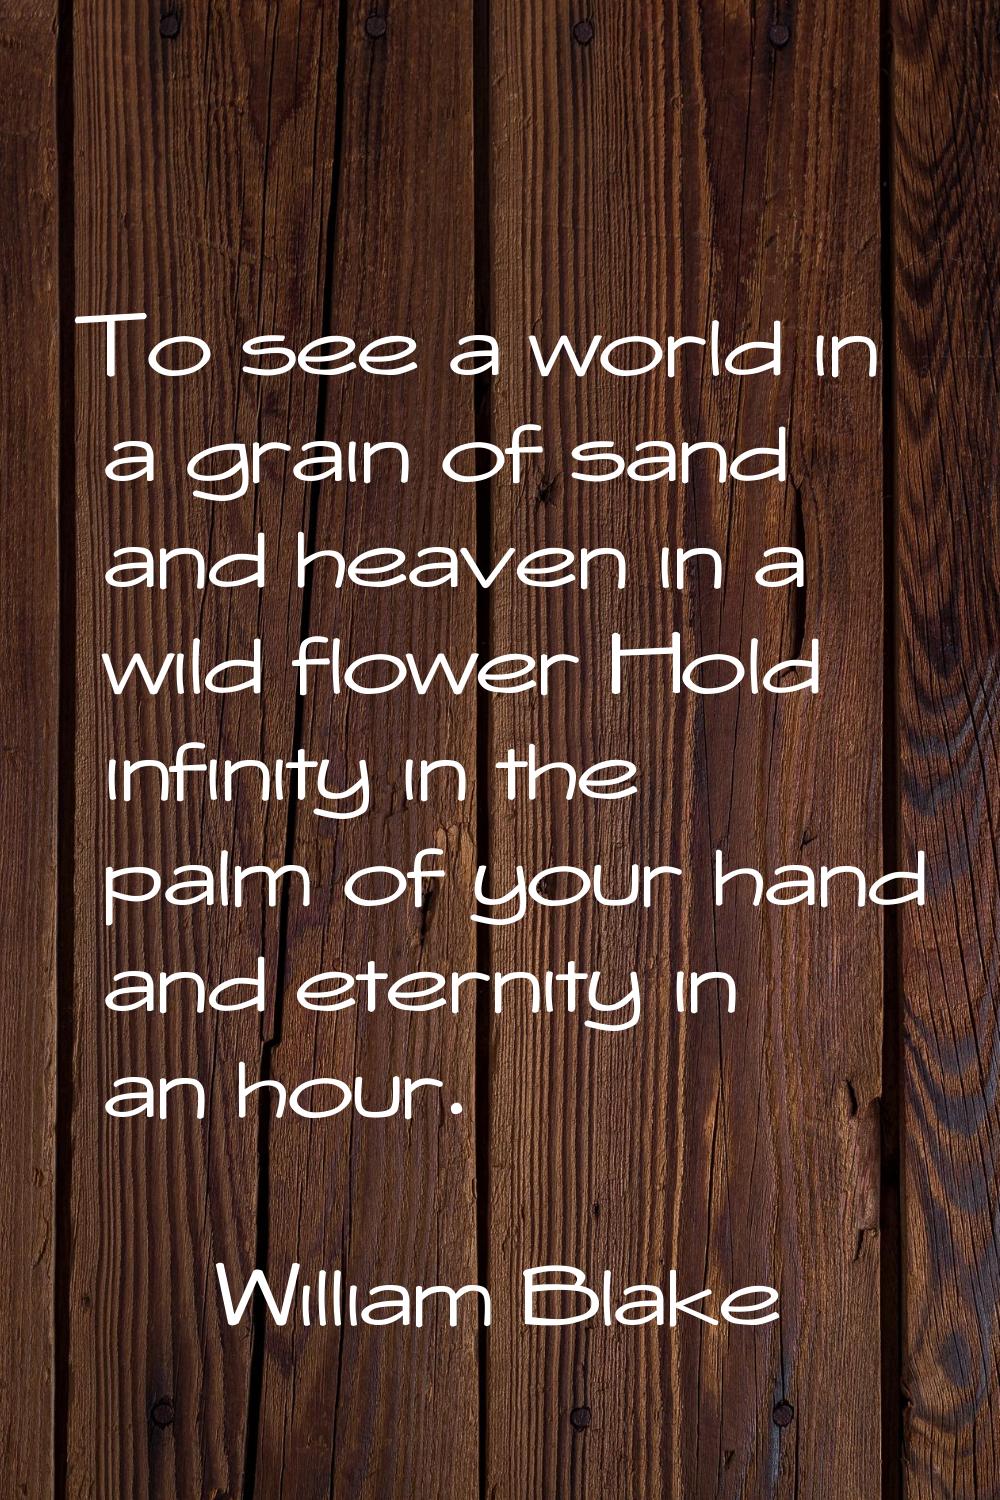 To see a world in a grain of sand and heaven in a wild flower Hold infinity in the palm of your han